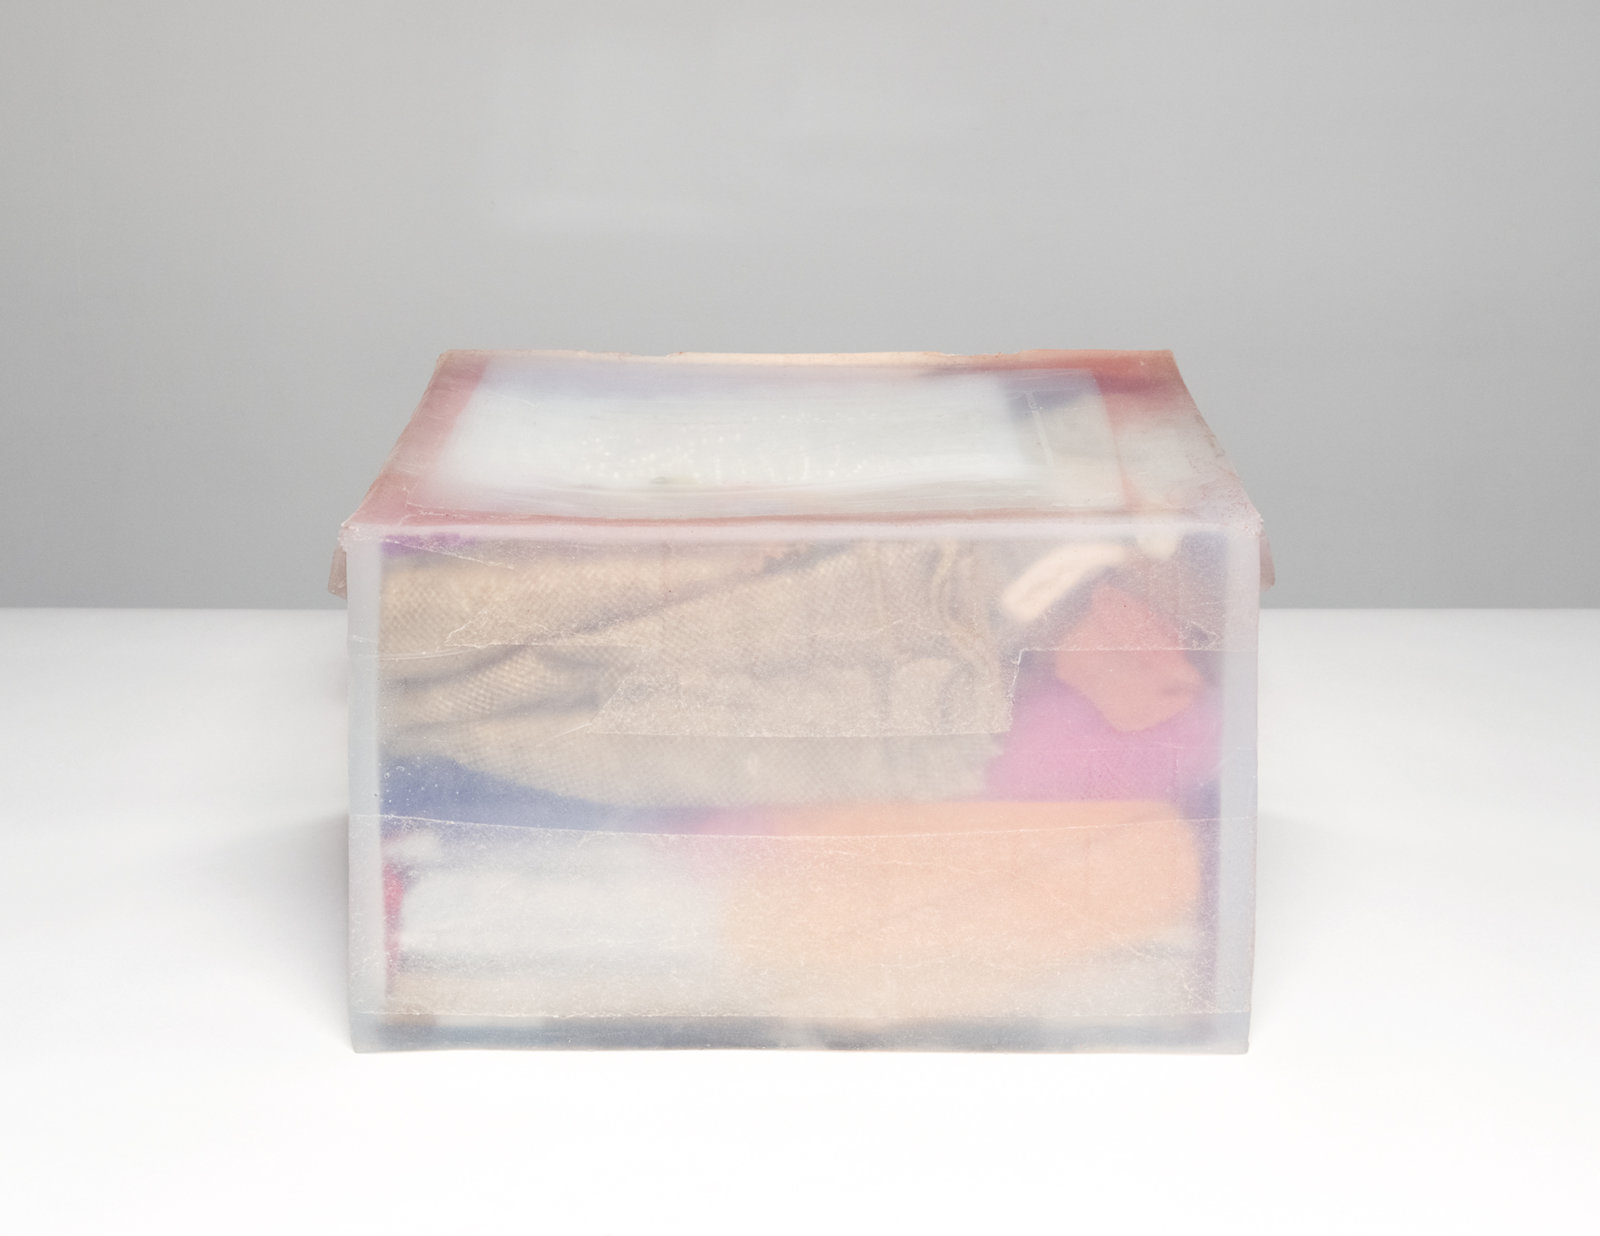 Liz Magor, All the Names I, 2014, silicone rubber, mixed fabric, 11 x 17 x 13 in. (27 x 42 x 33 cm)